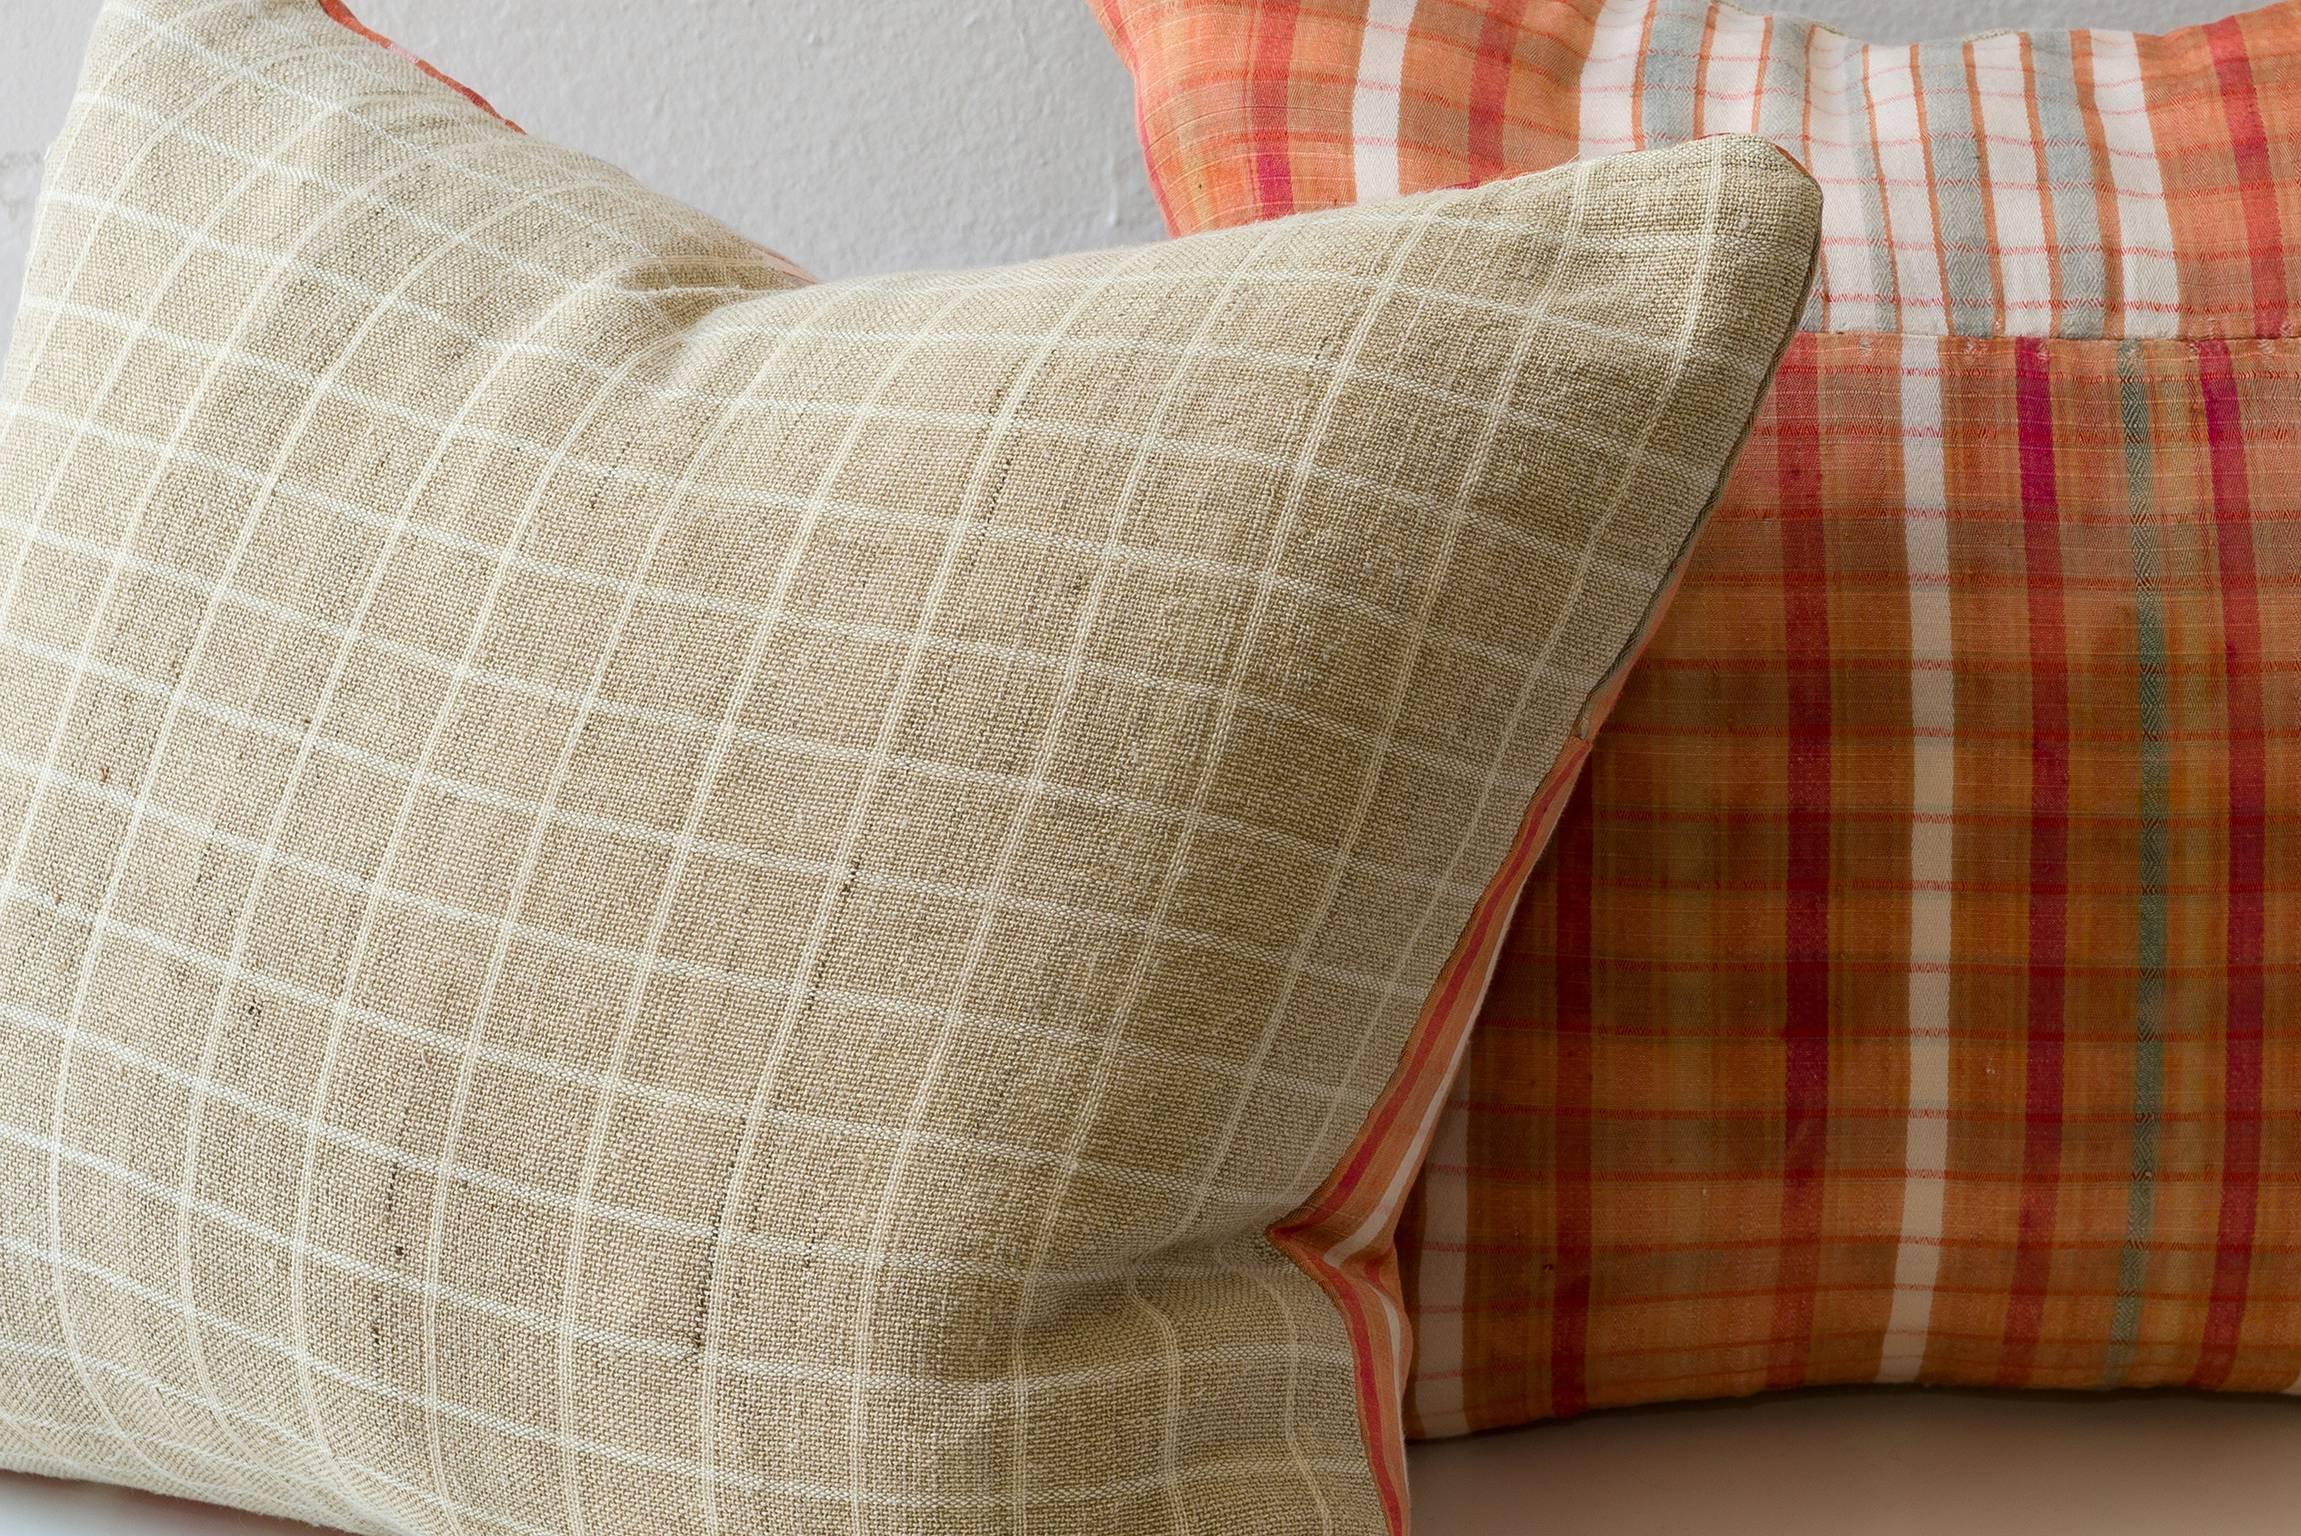 Silk Hand Loomed Cushion- Orange, Pumpkin, Red, White  In Excellent Condition For Sale In Los Angeles, CA